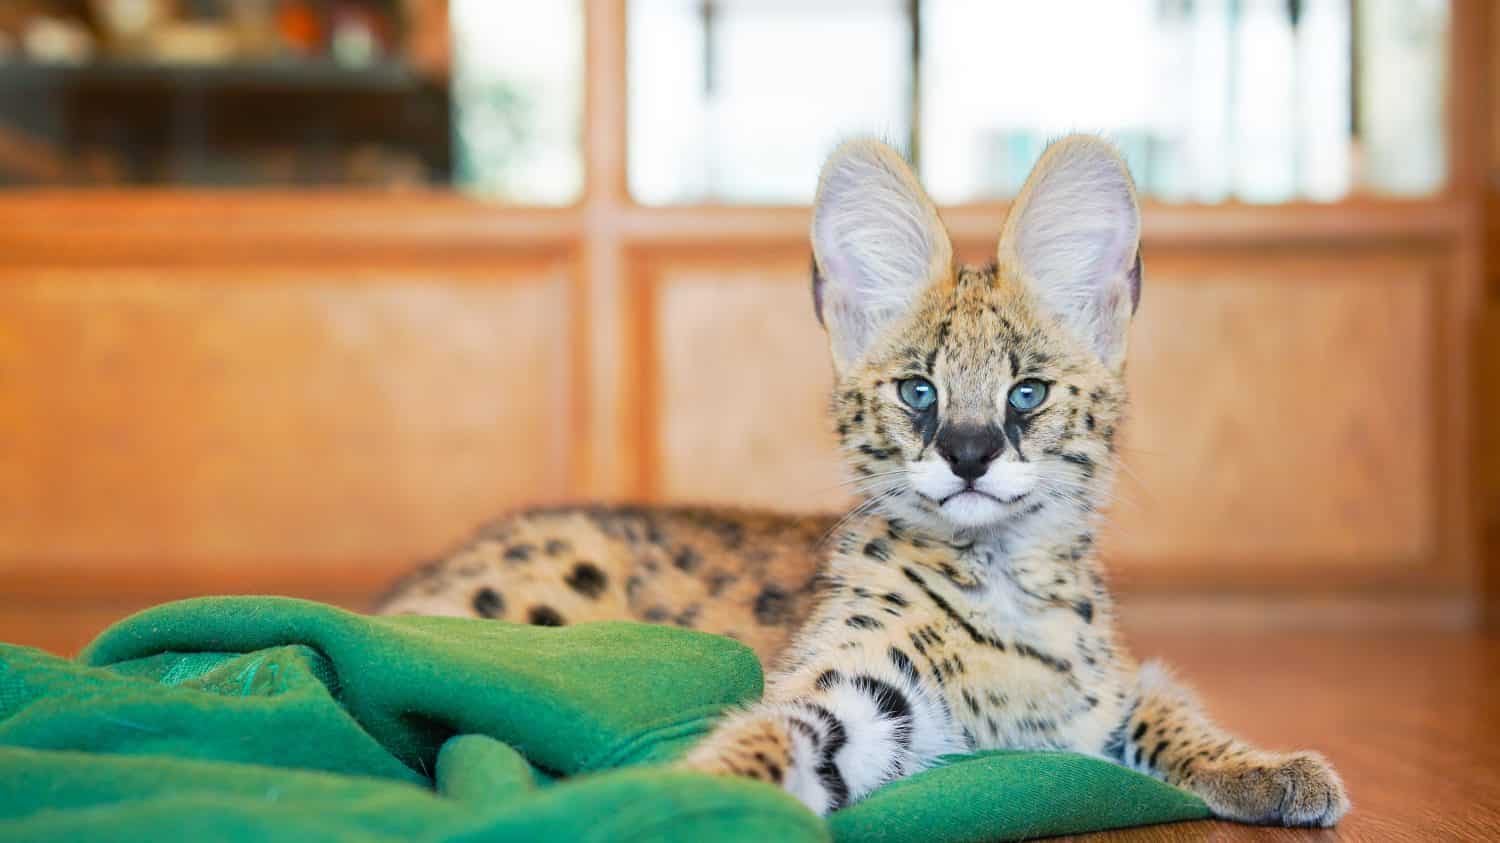 Young serval cat kitten